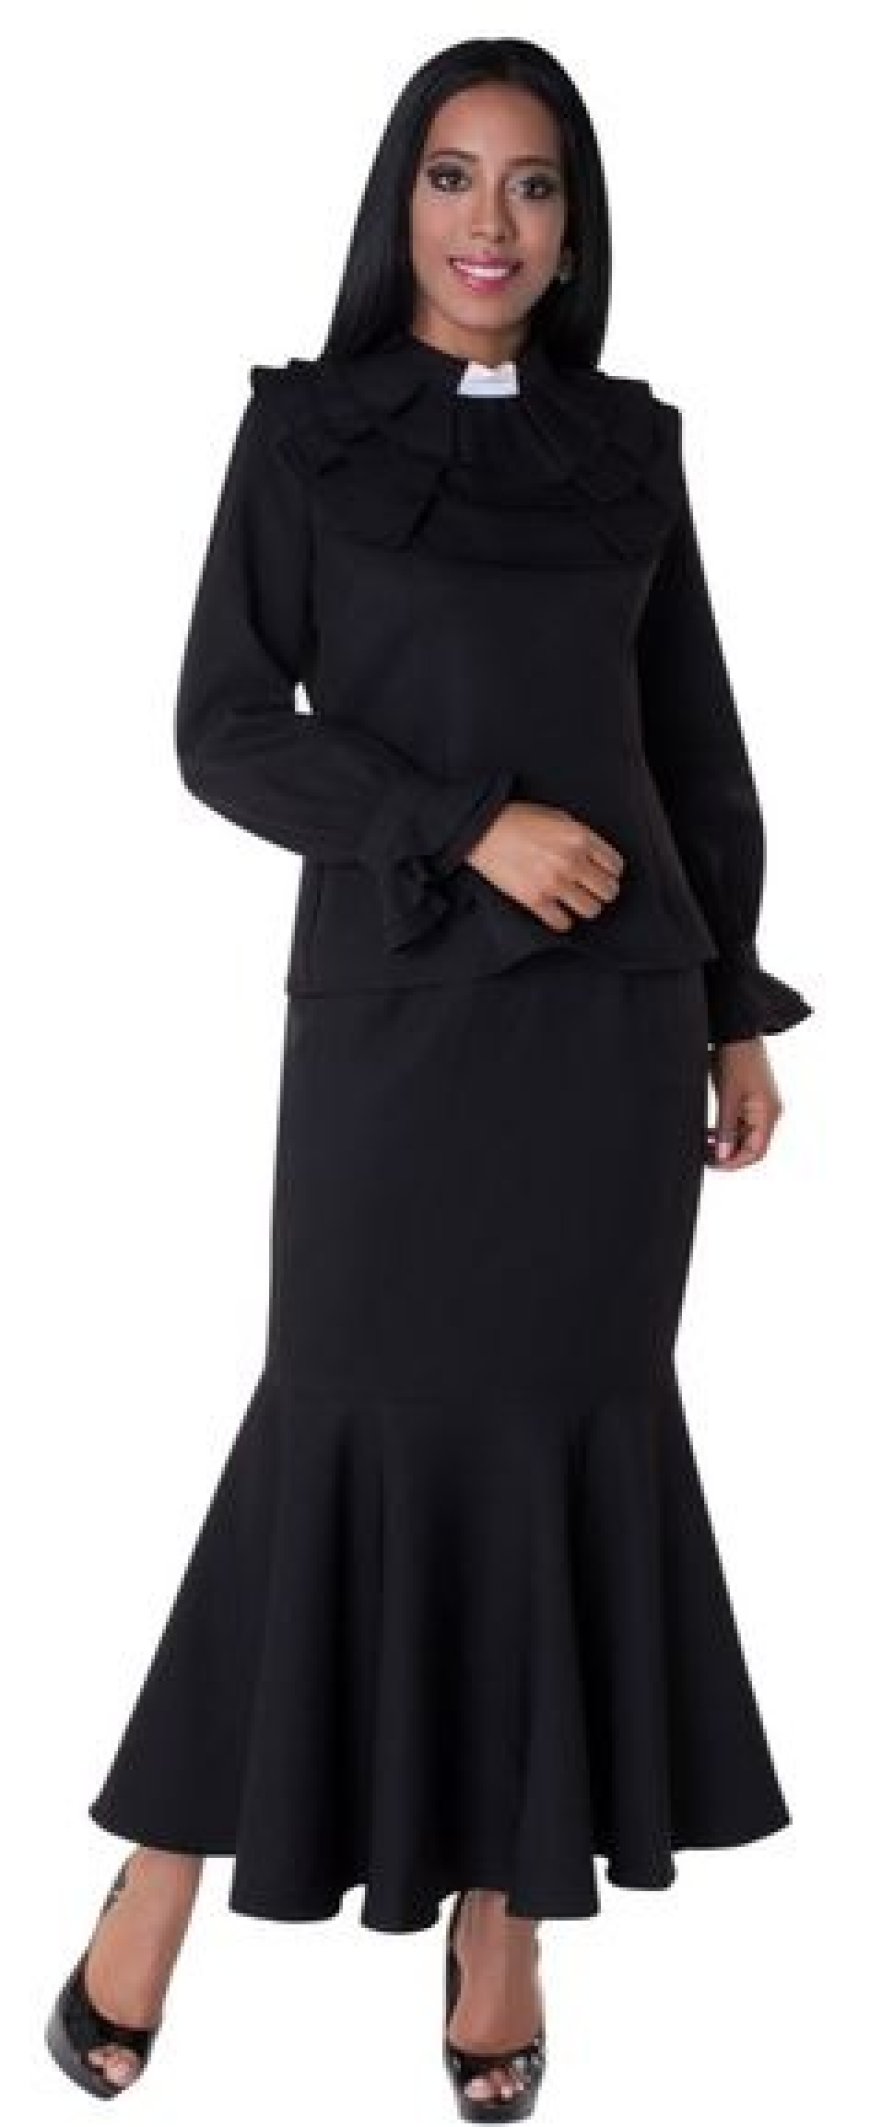 Chic and Modest: Finding the Perfect Women's Church Dresses